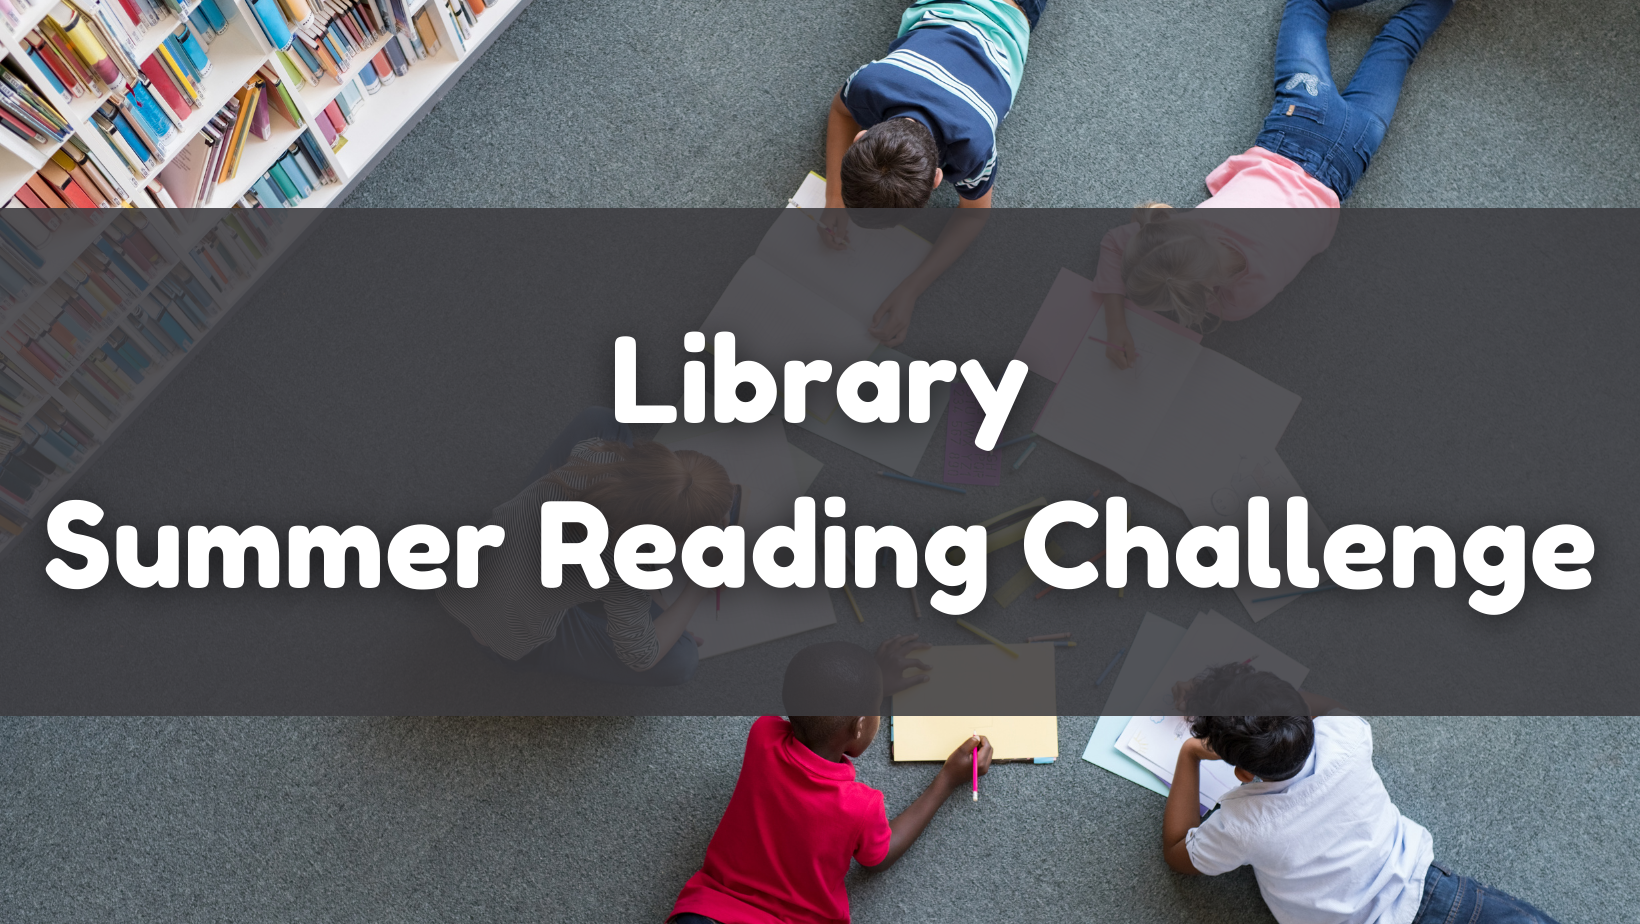 The Library’s Summer Reading Challenge